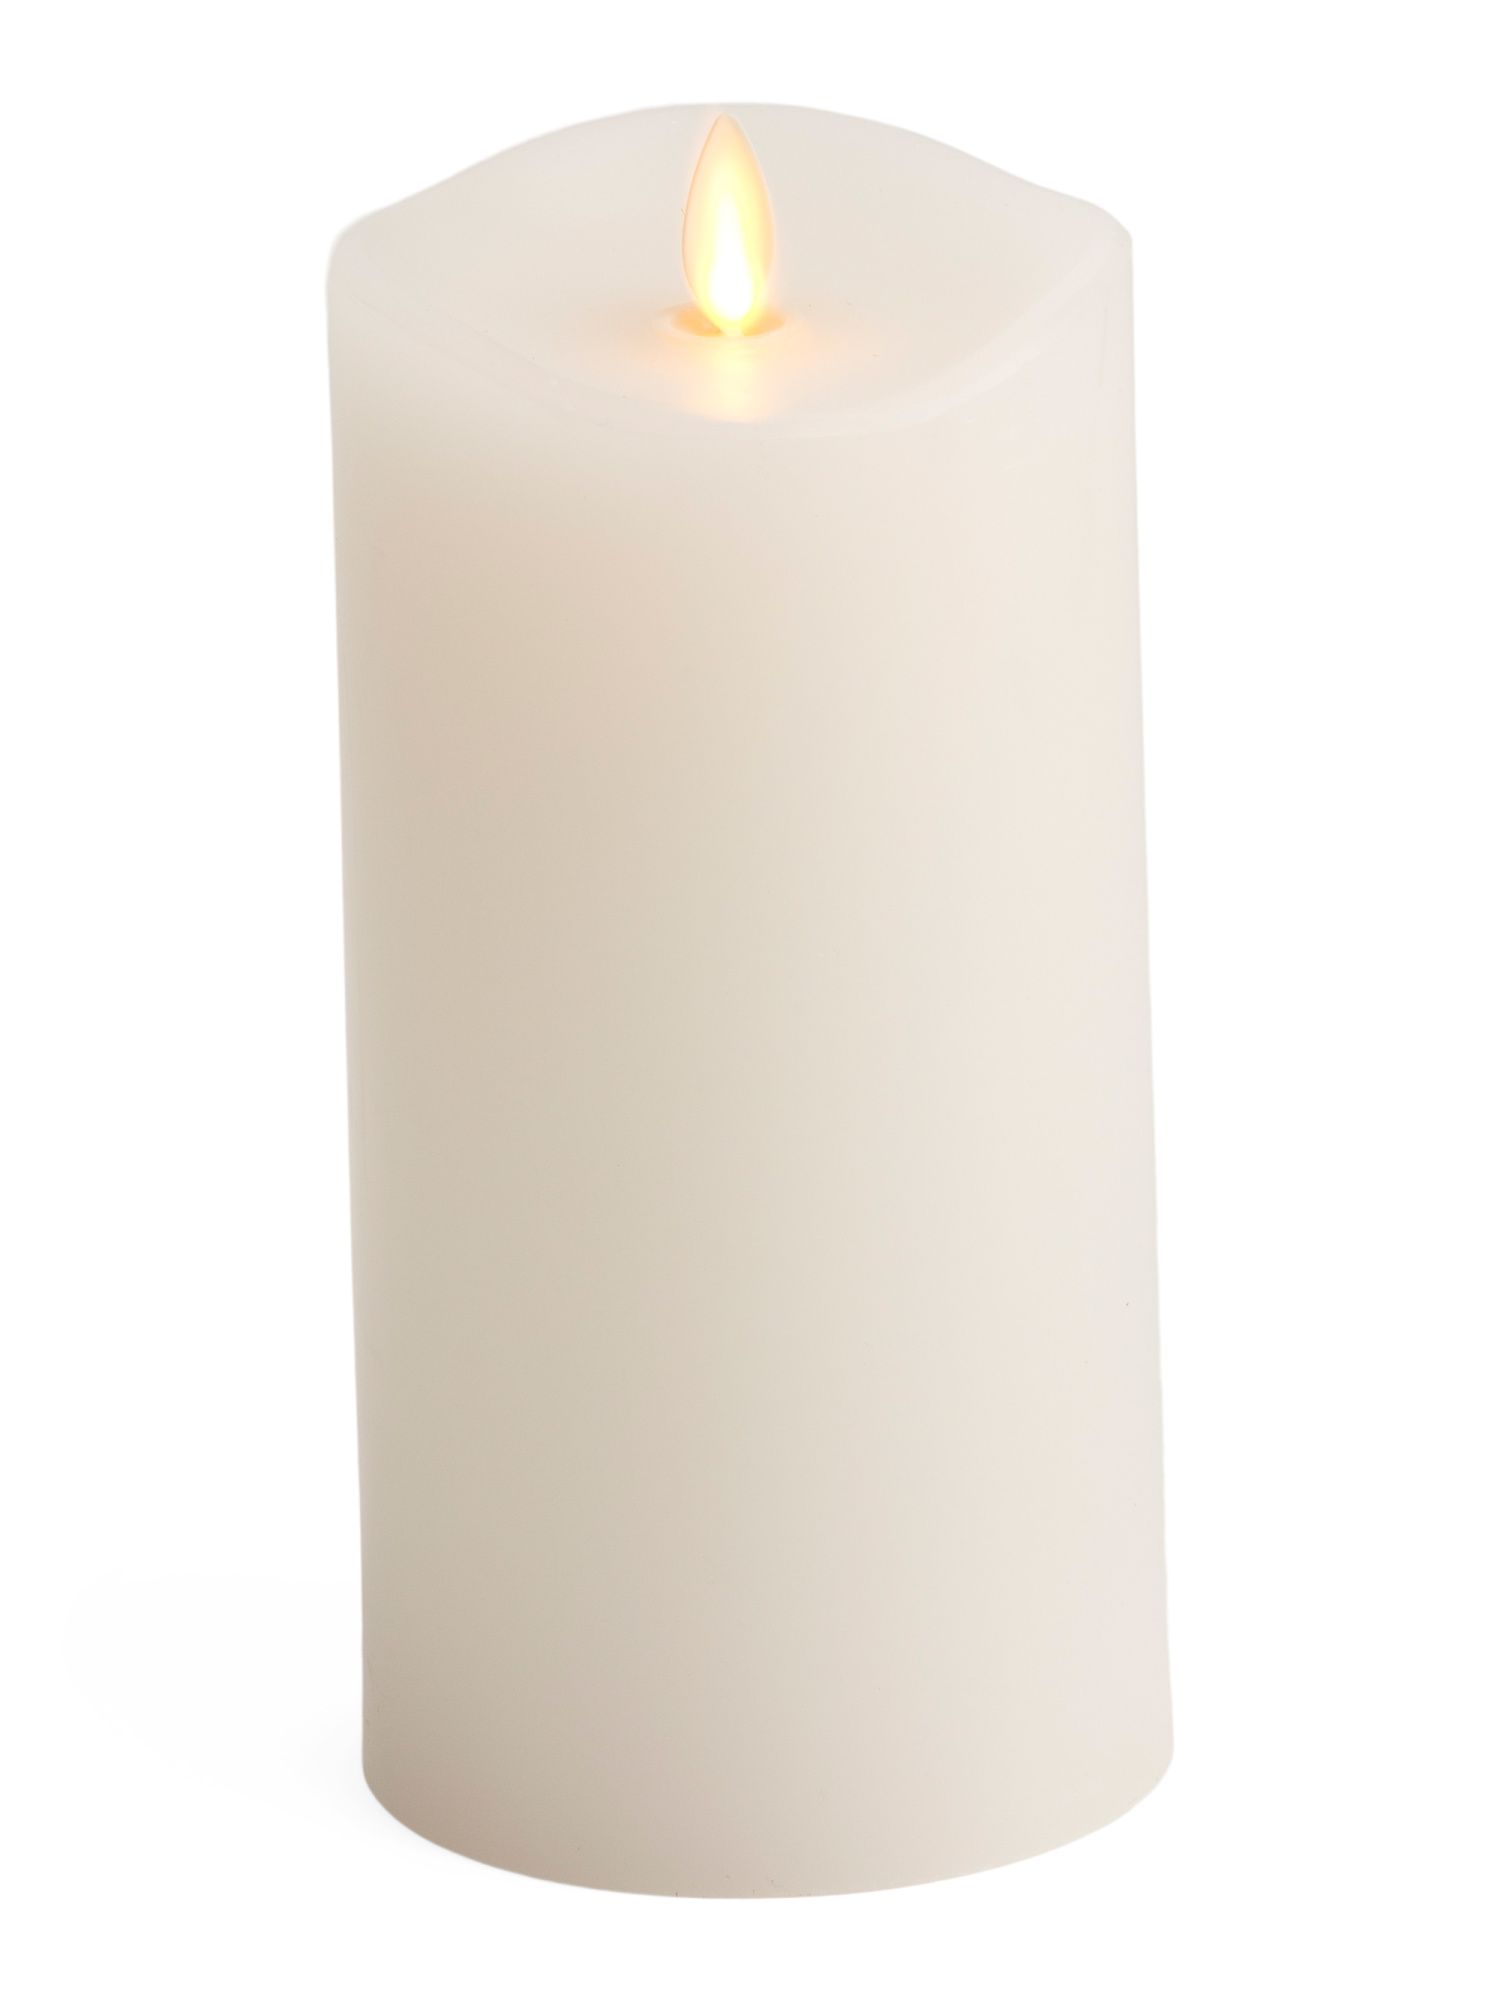 7.5in Melted Edge Led Pillar Candle | Marshalls